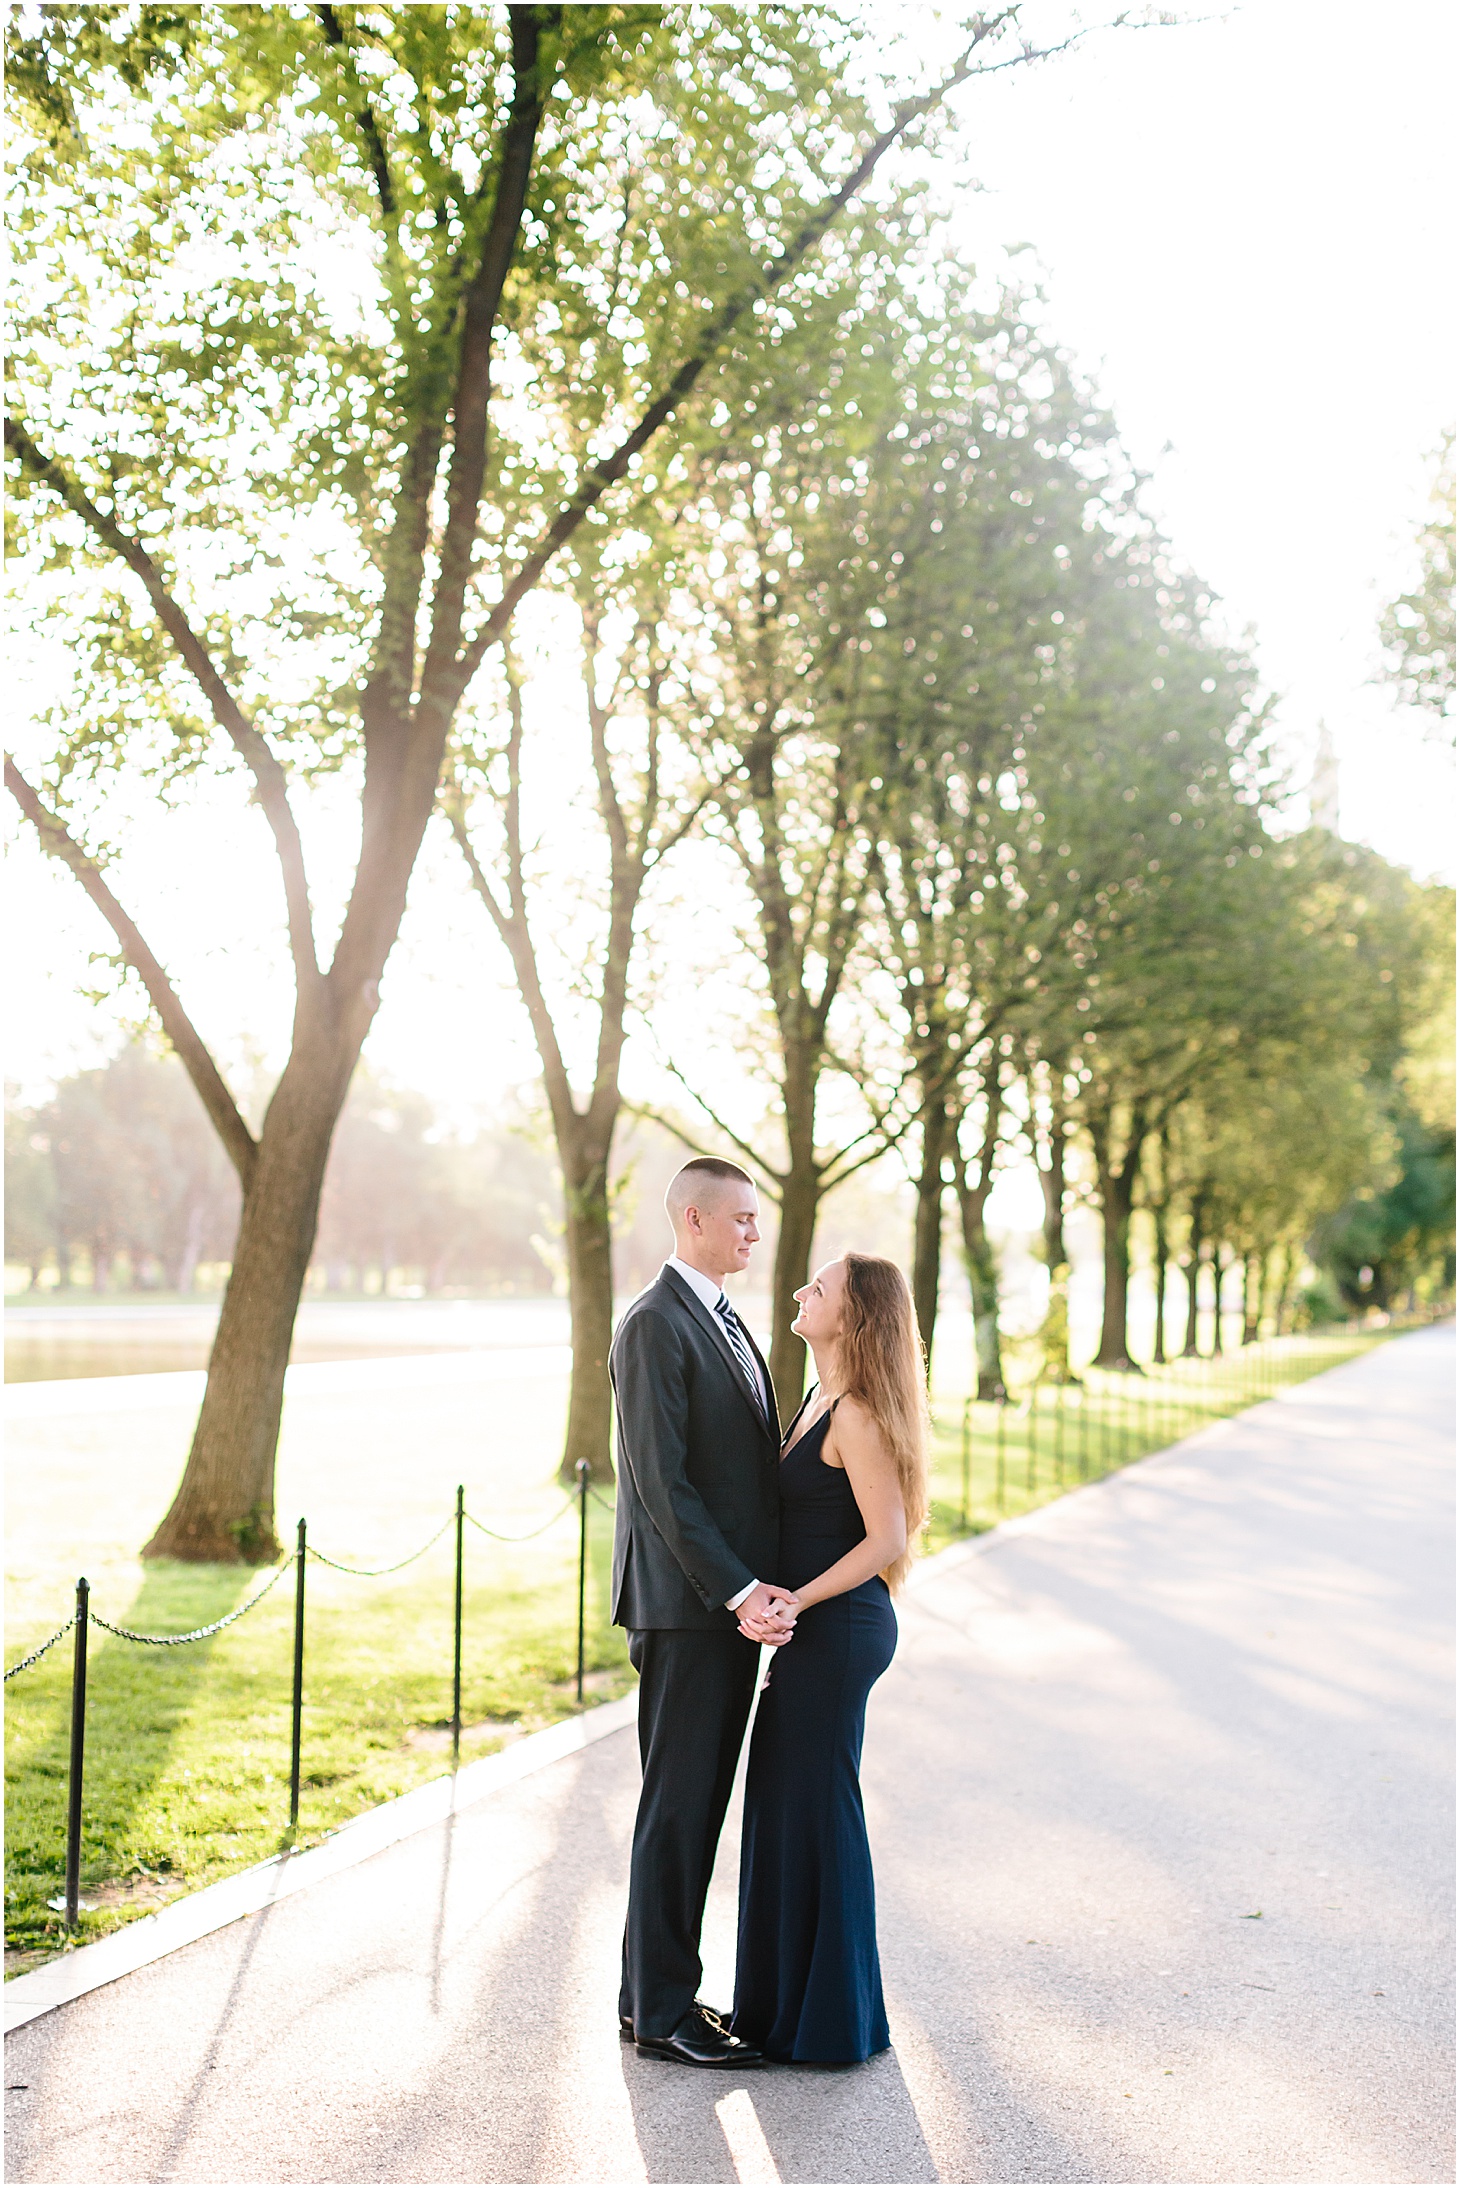 Elegant Engagement Portraits at National Mall in DC, Summer Sunrise Engagement at the Lincoln Memorial, Sarah Bradshaw Photography, DC Wedding Photographer